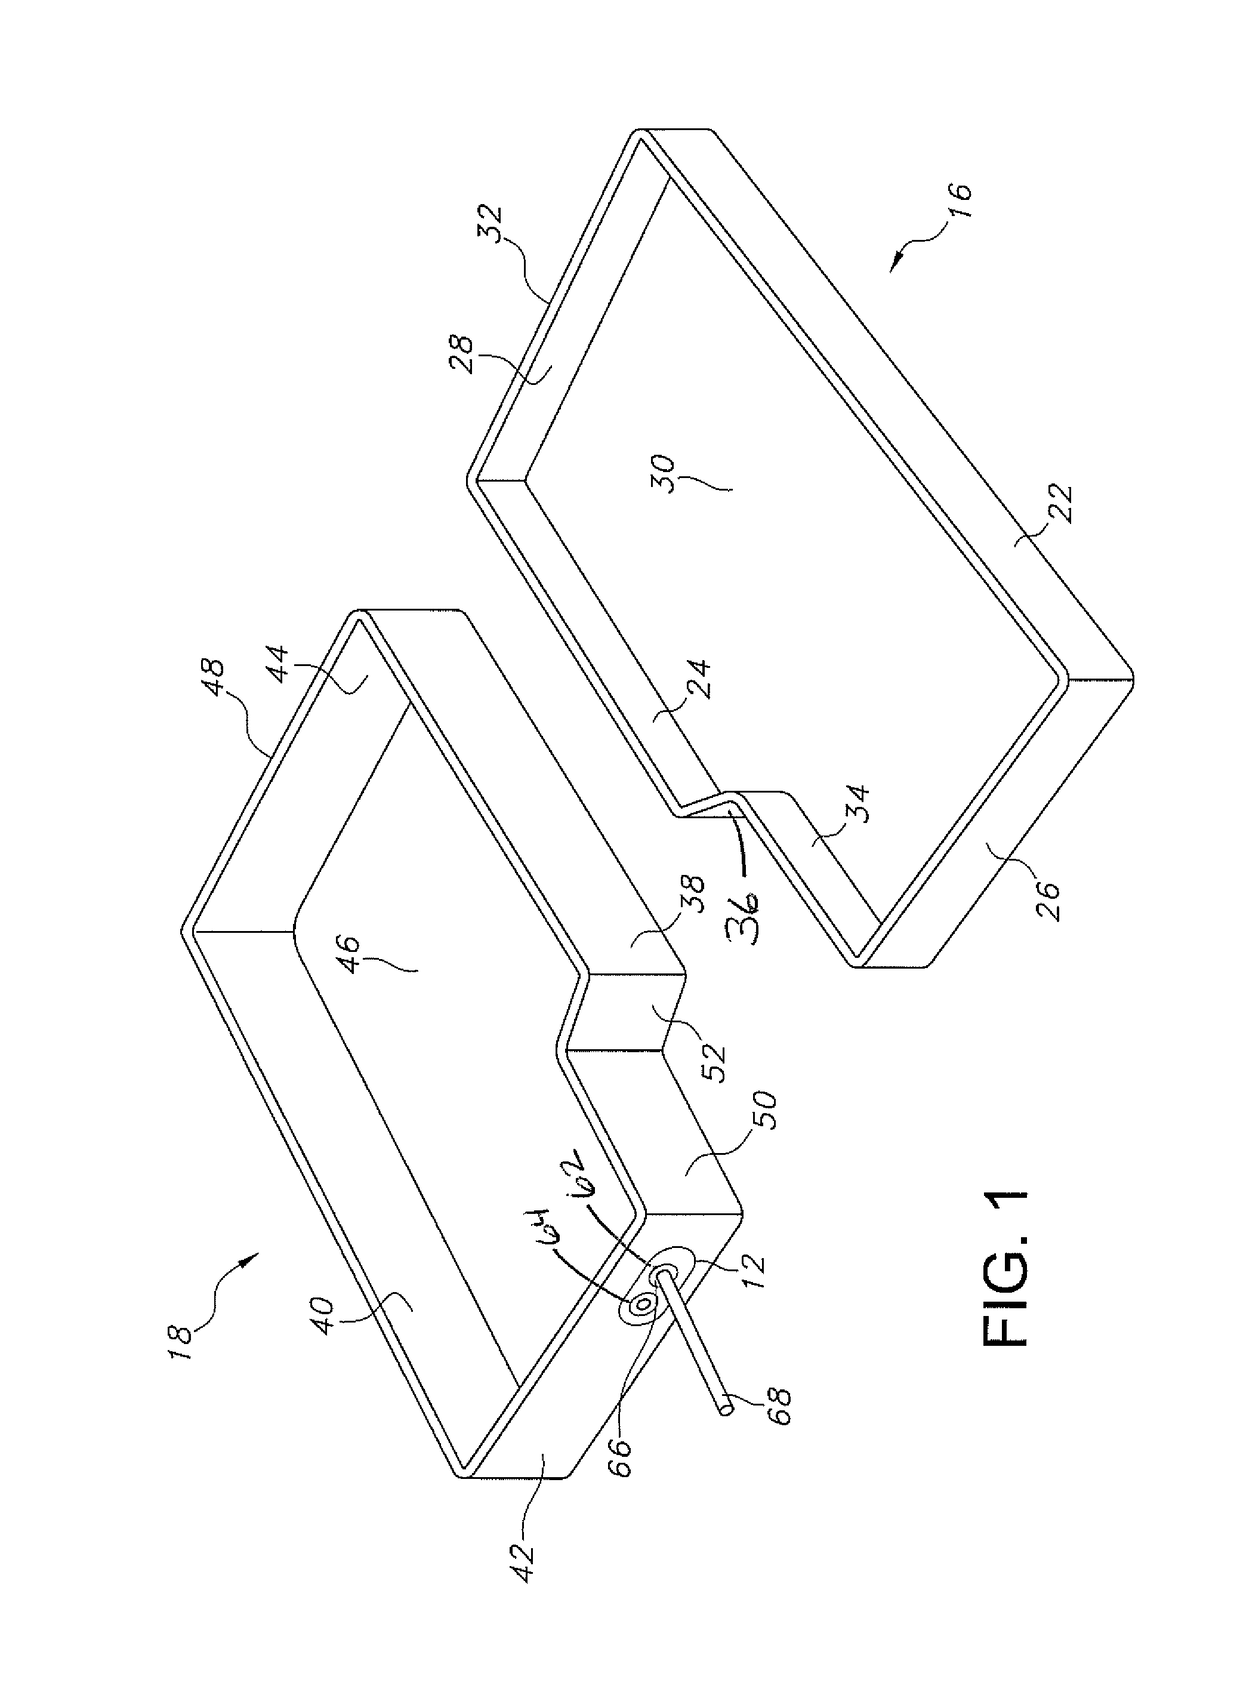 Closure system for the electrolyte fill port of an electrochemical cell